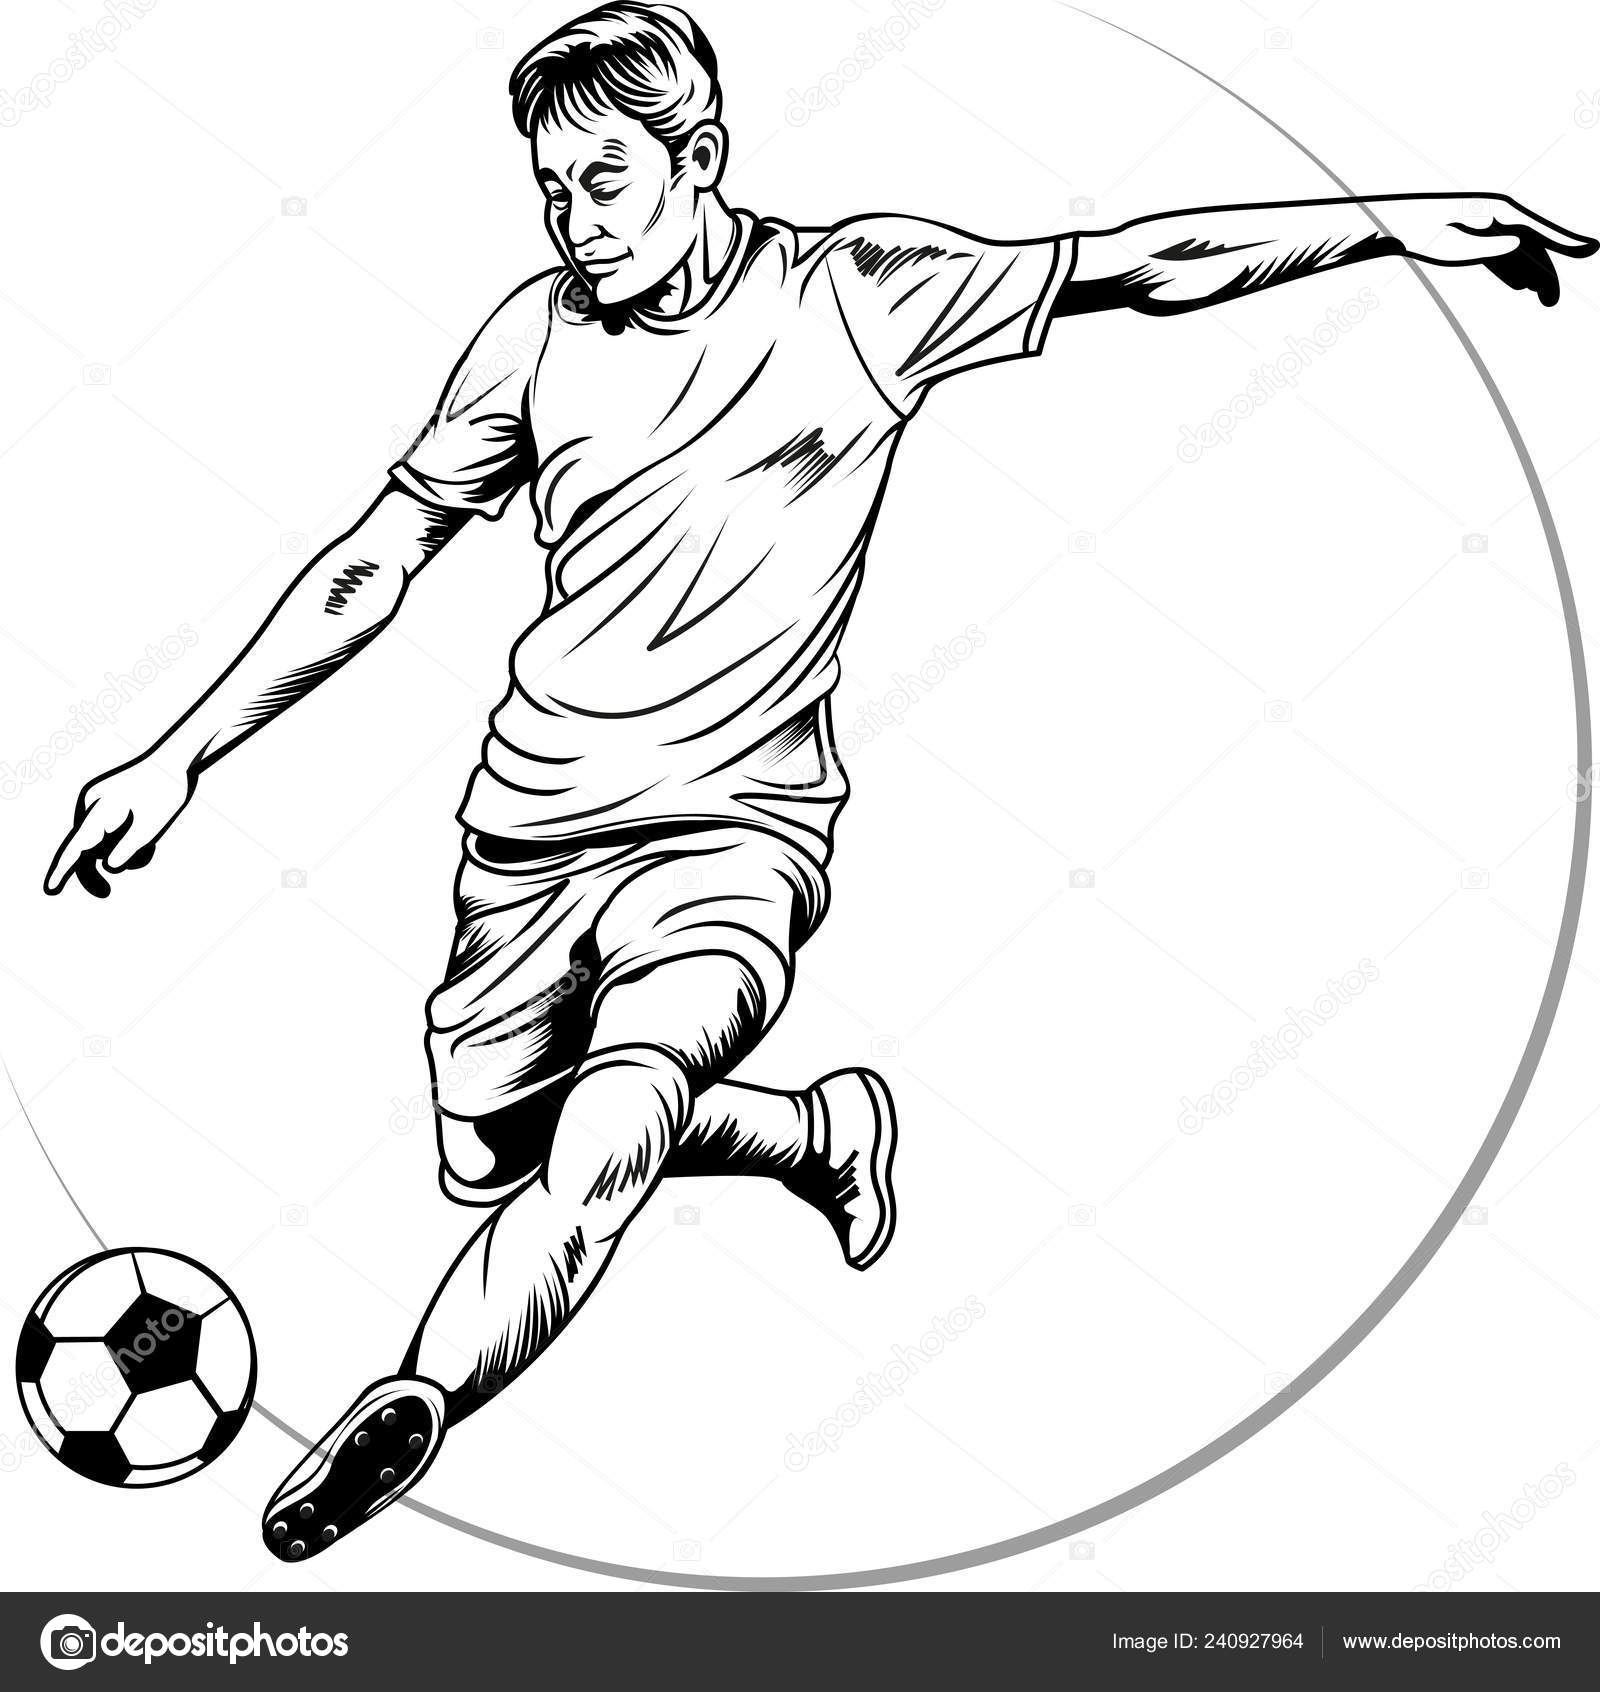 Football Drawing | About this video:- Football drawing Realistic football  drawing | By Santosh yadav artFacebook